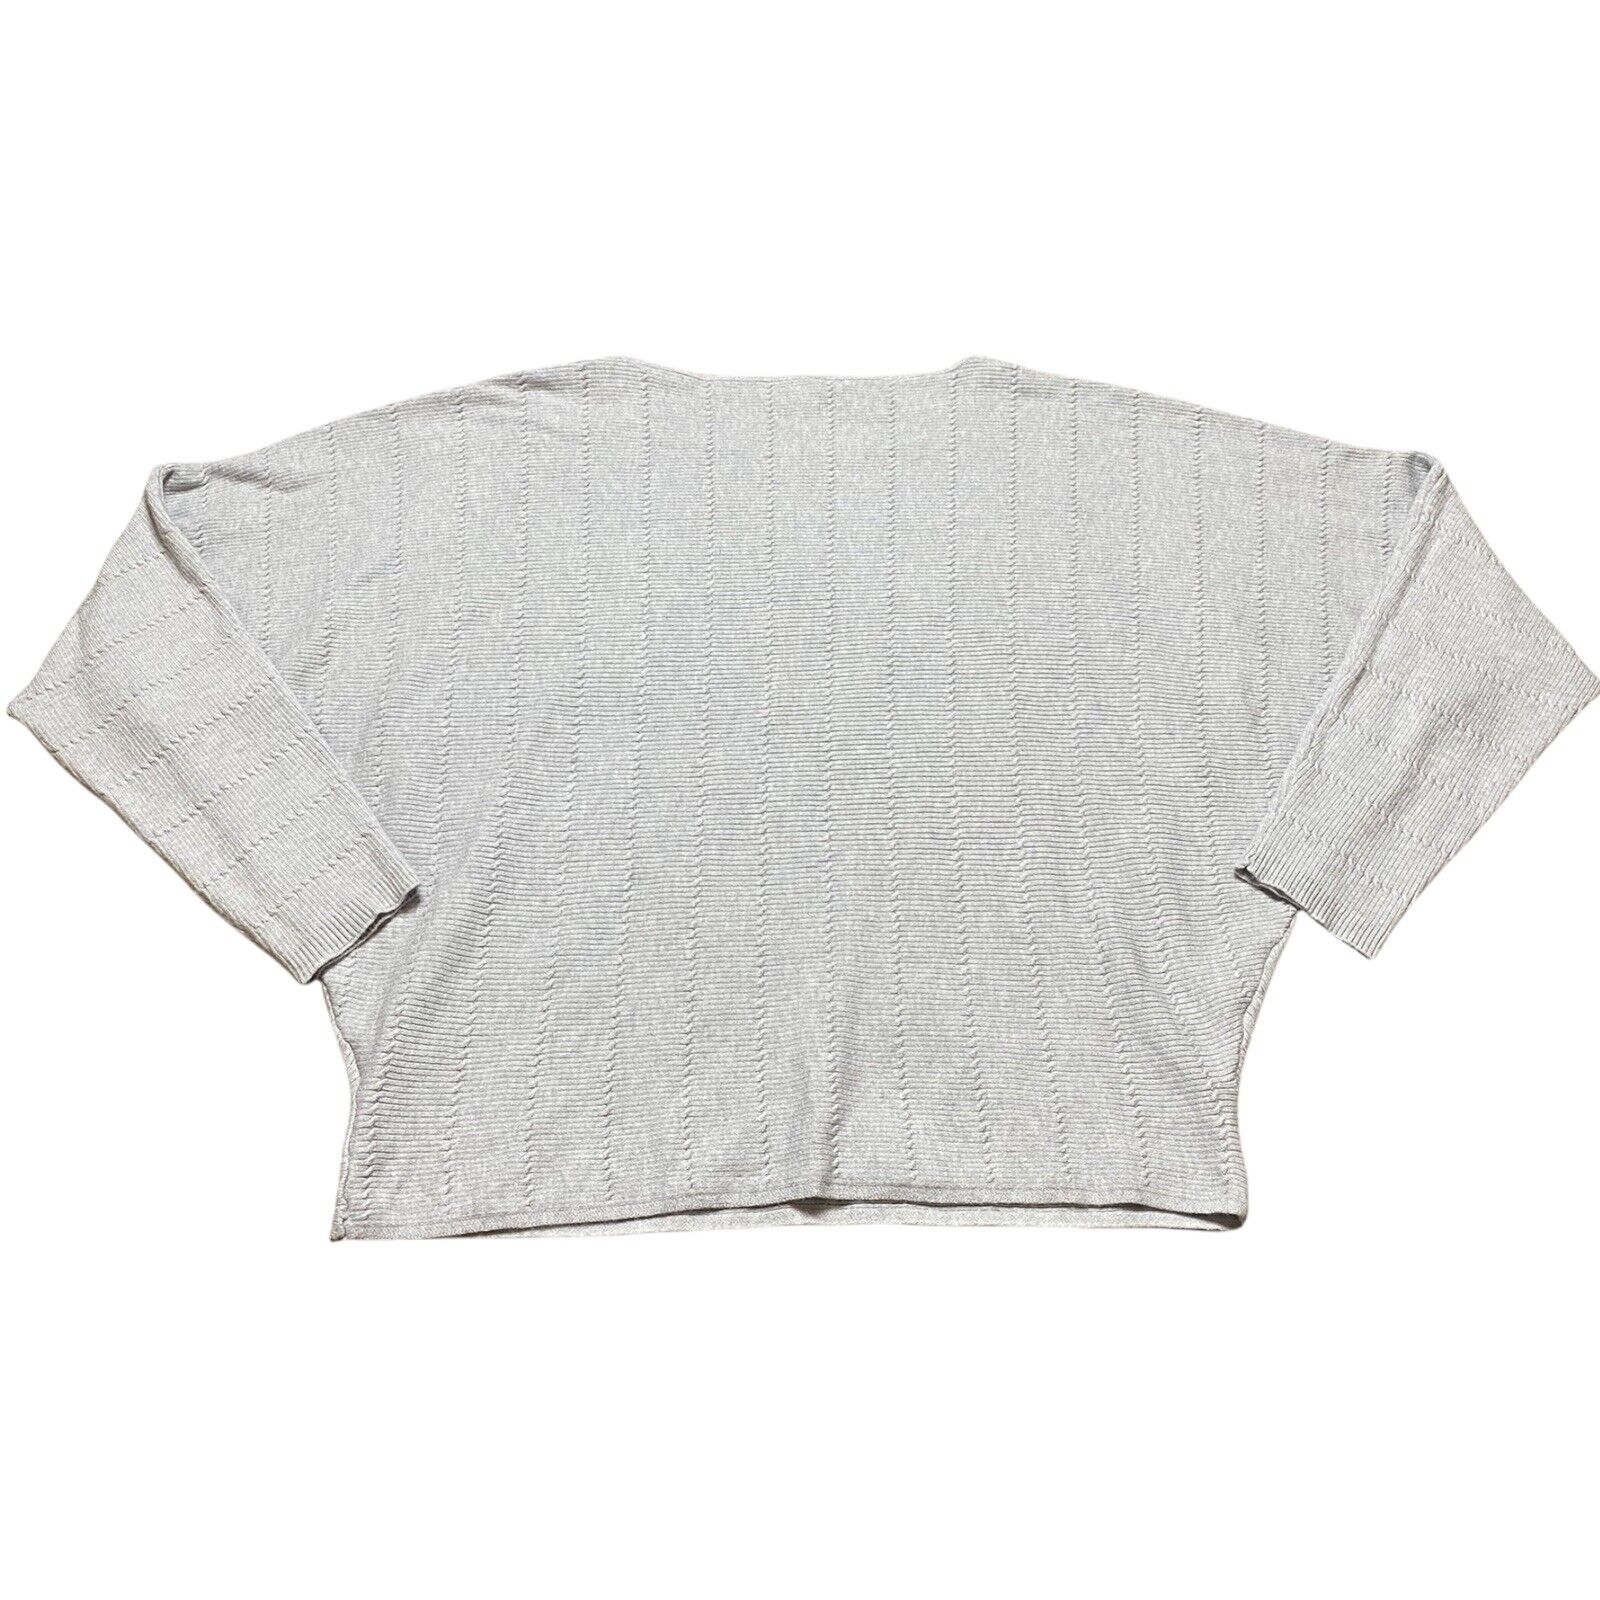 Cyrus Women L Sweater Gray Long Sleeve Pullover - image 5